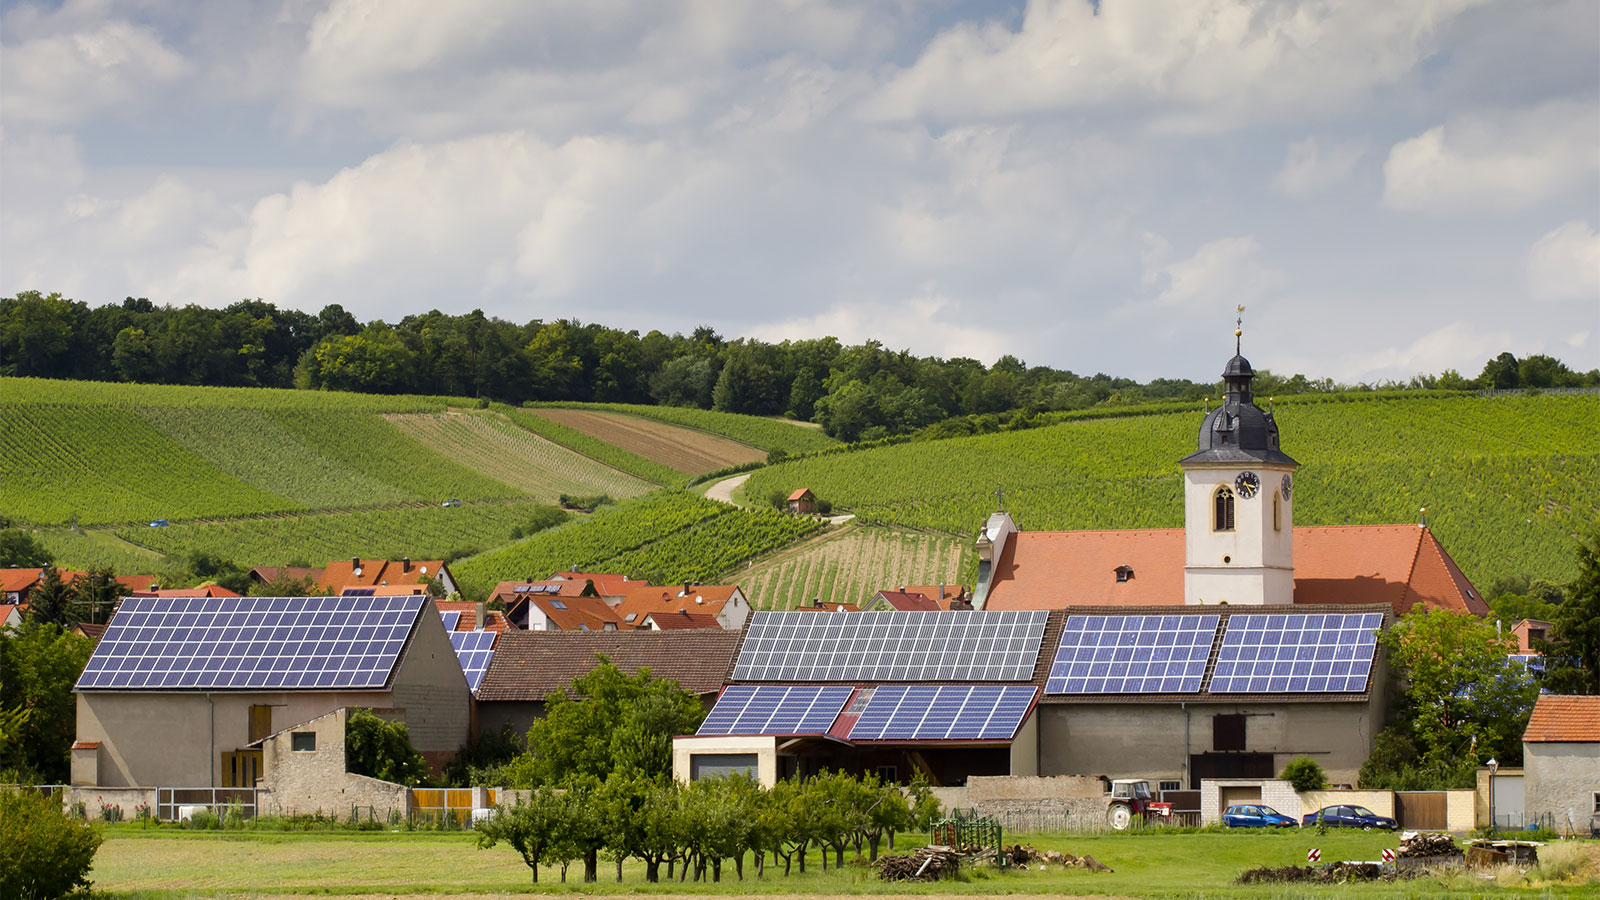 Solar panels installed on roofs in quaint village